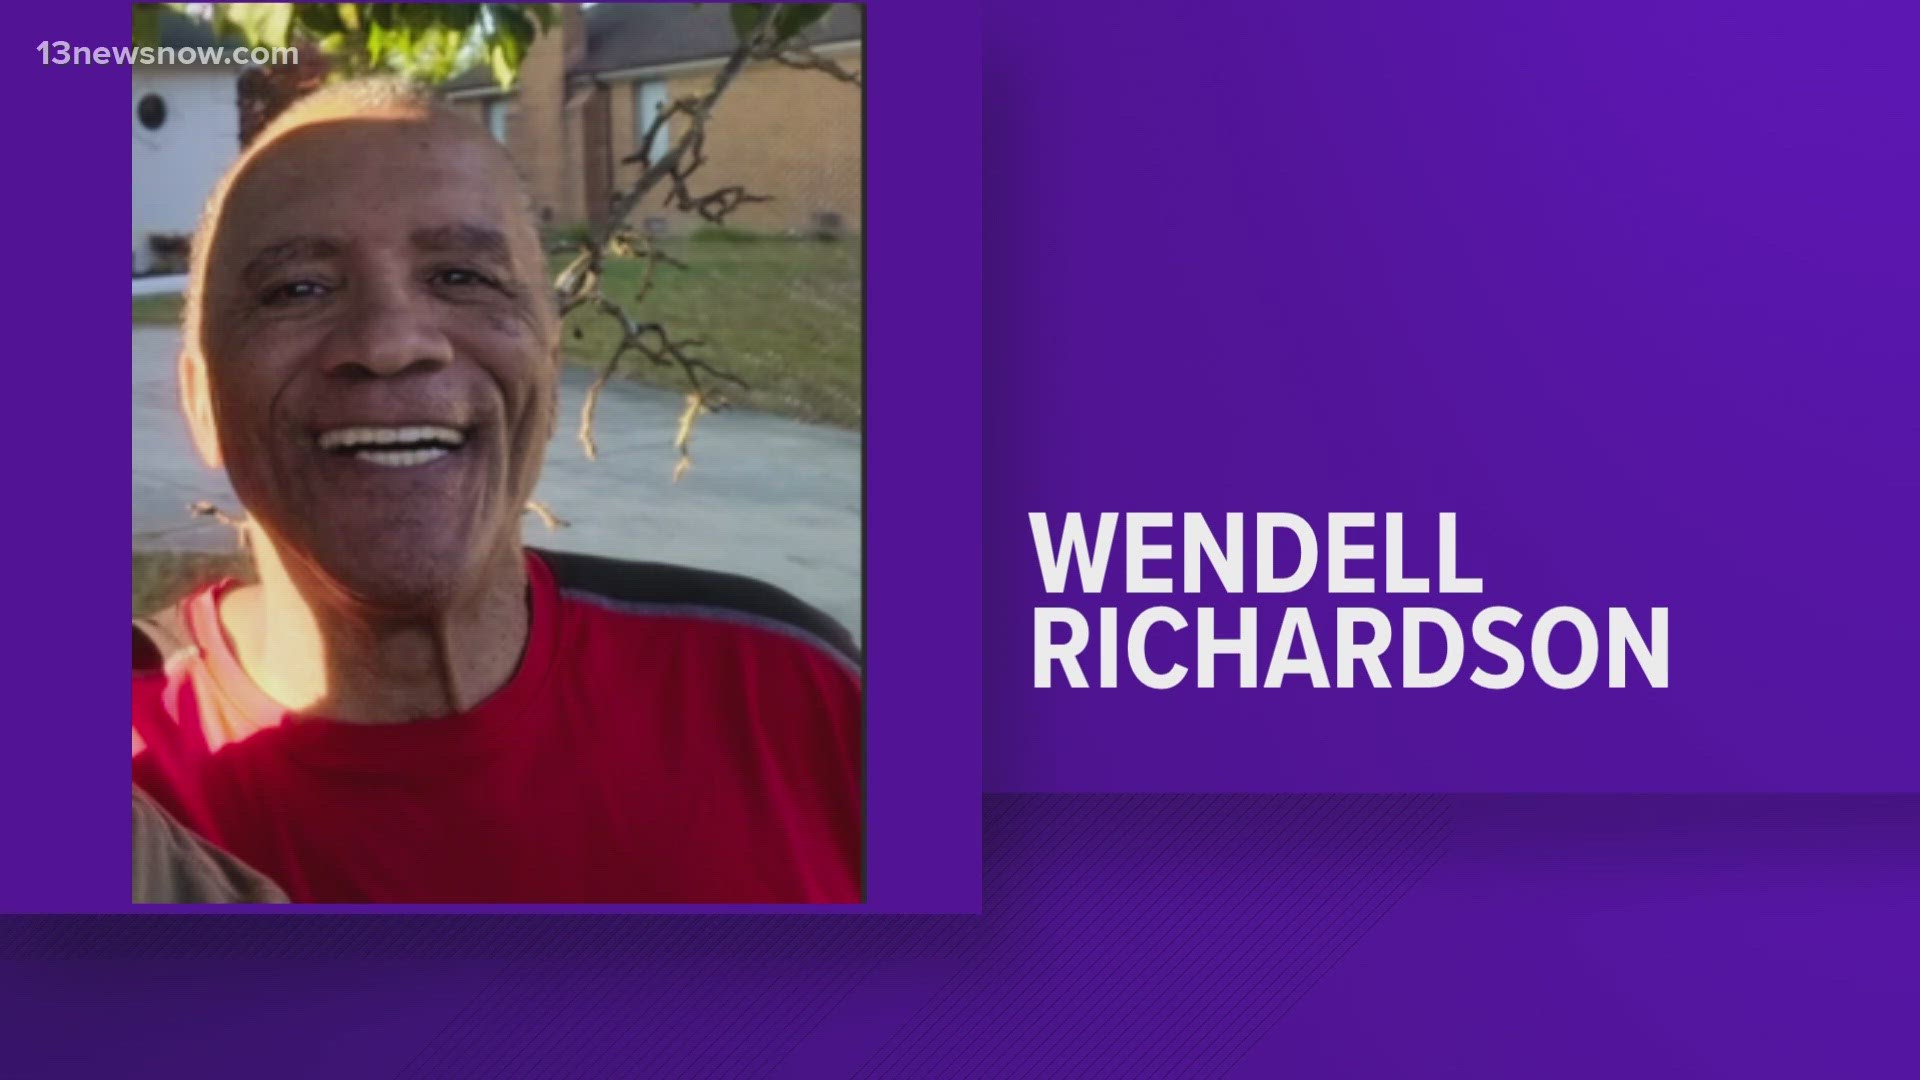 Investigators are searching for 68-year-old Wendell Richardson. Richardson was last seen on Saturday in the 1500 block of Crystal Lake Drive.